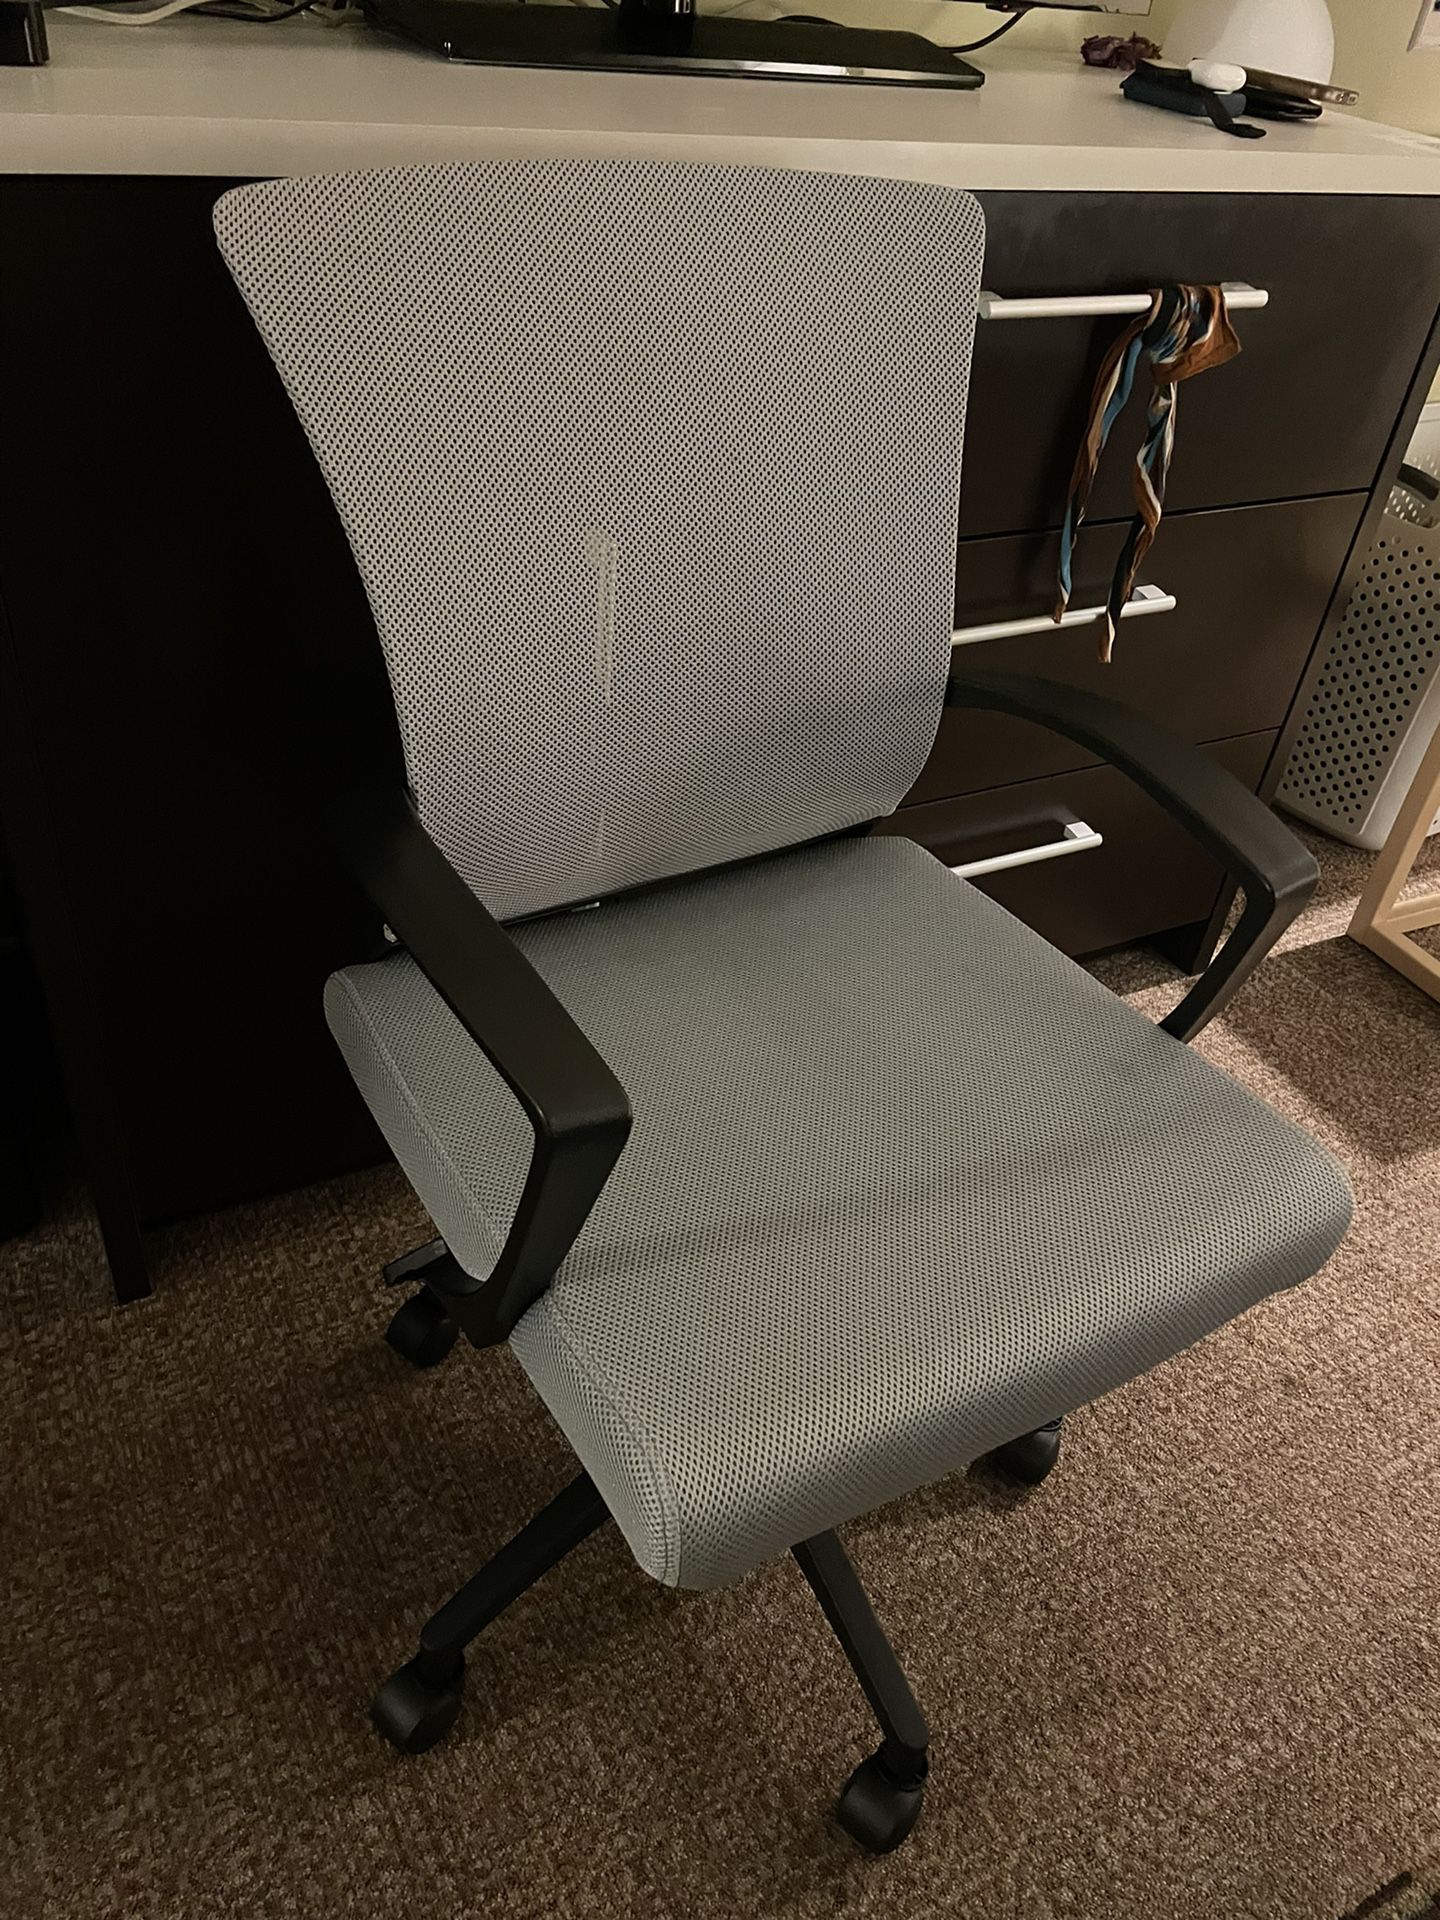 Desk Chair And Monitor 